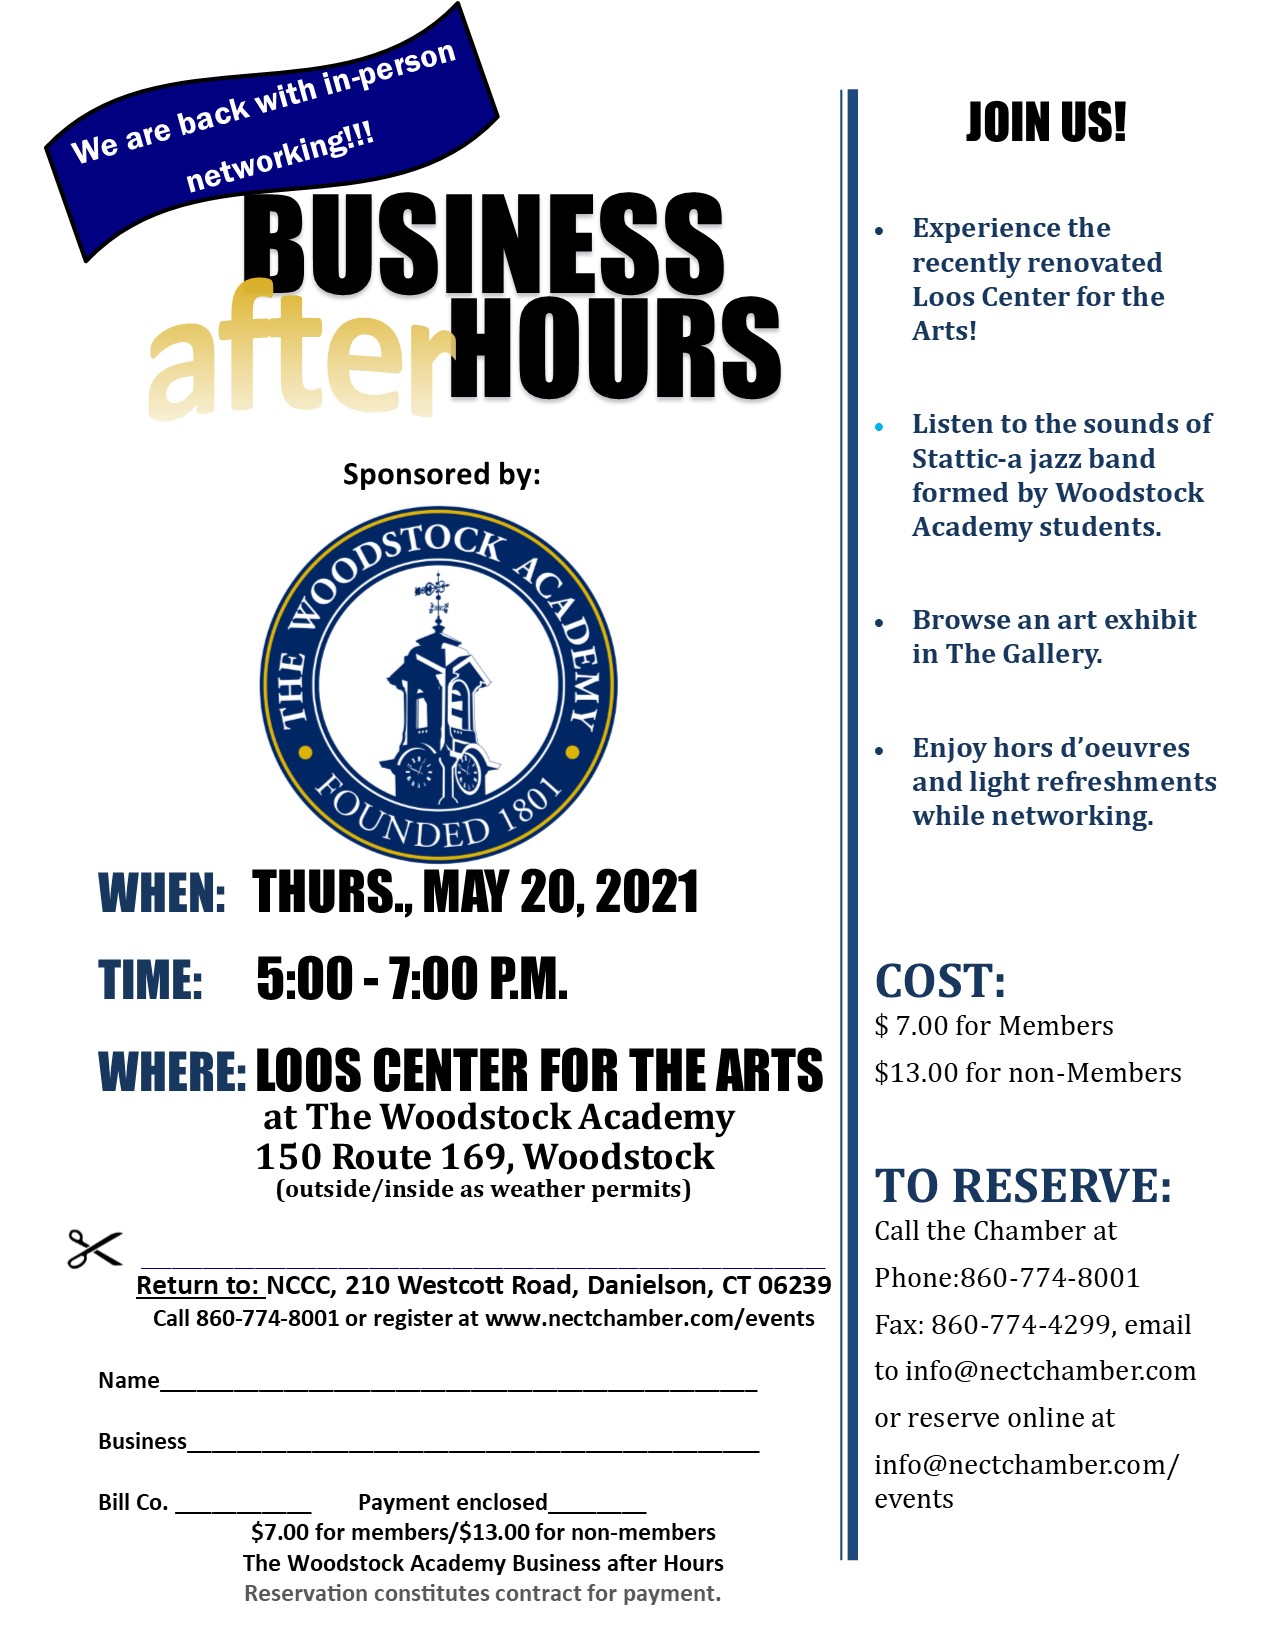 business-after-hours-the-woodstock-academy-northeastern-ct-chamber-of-commerce